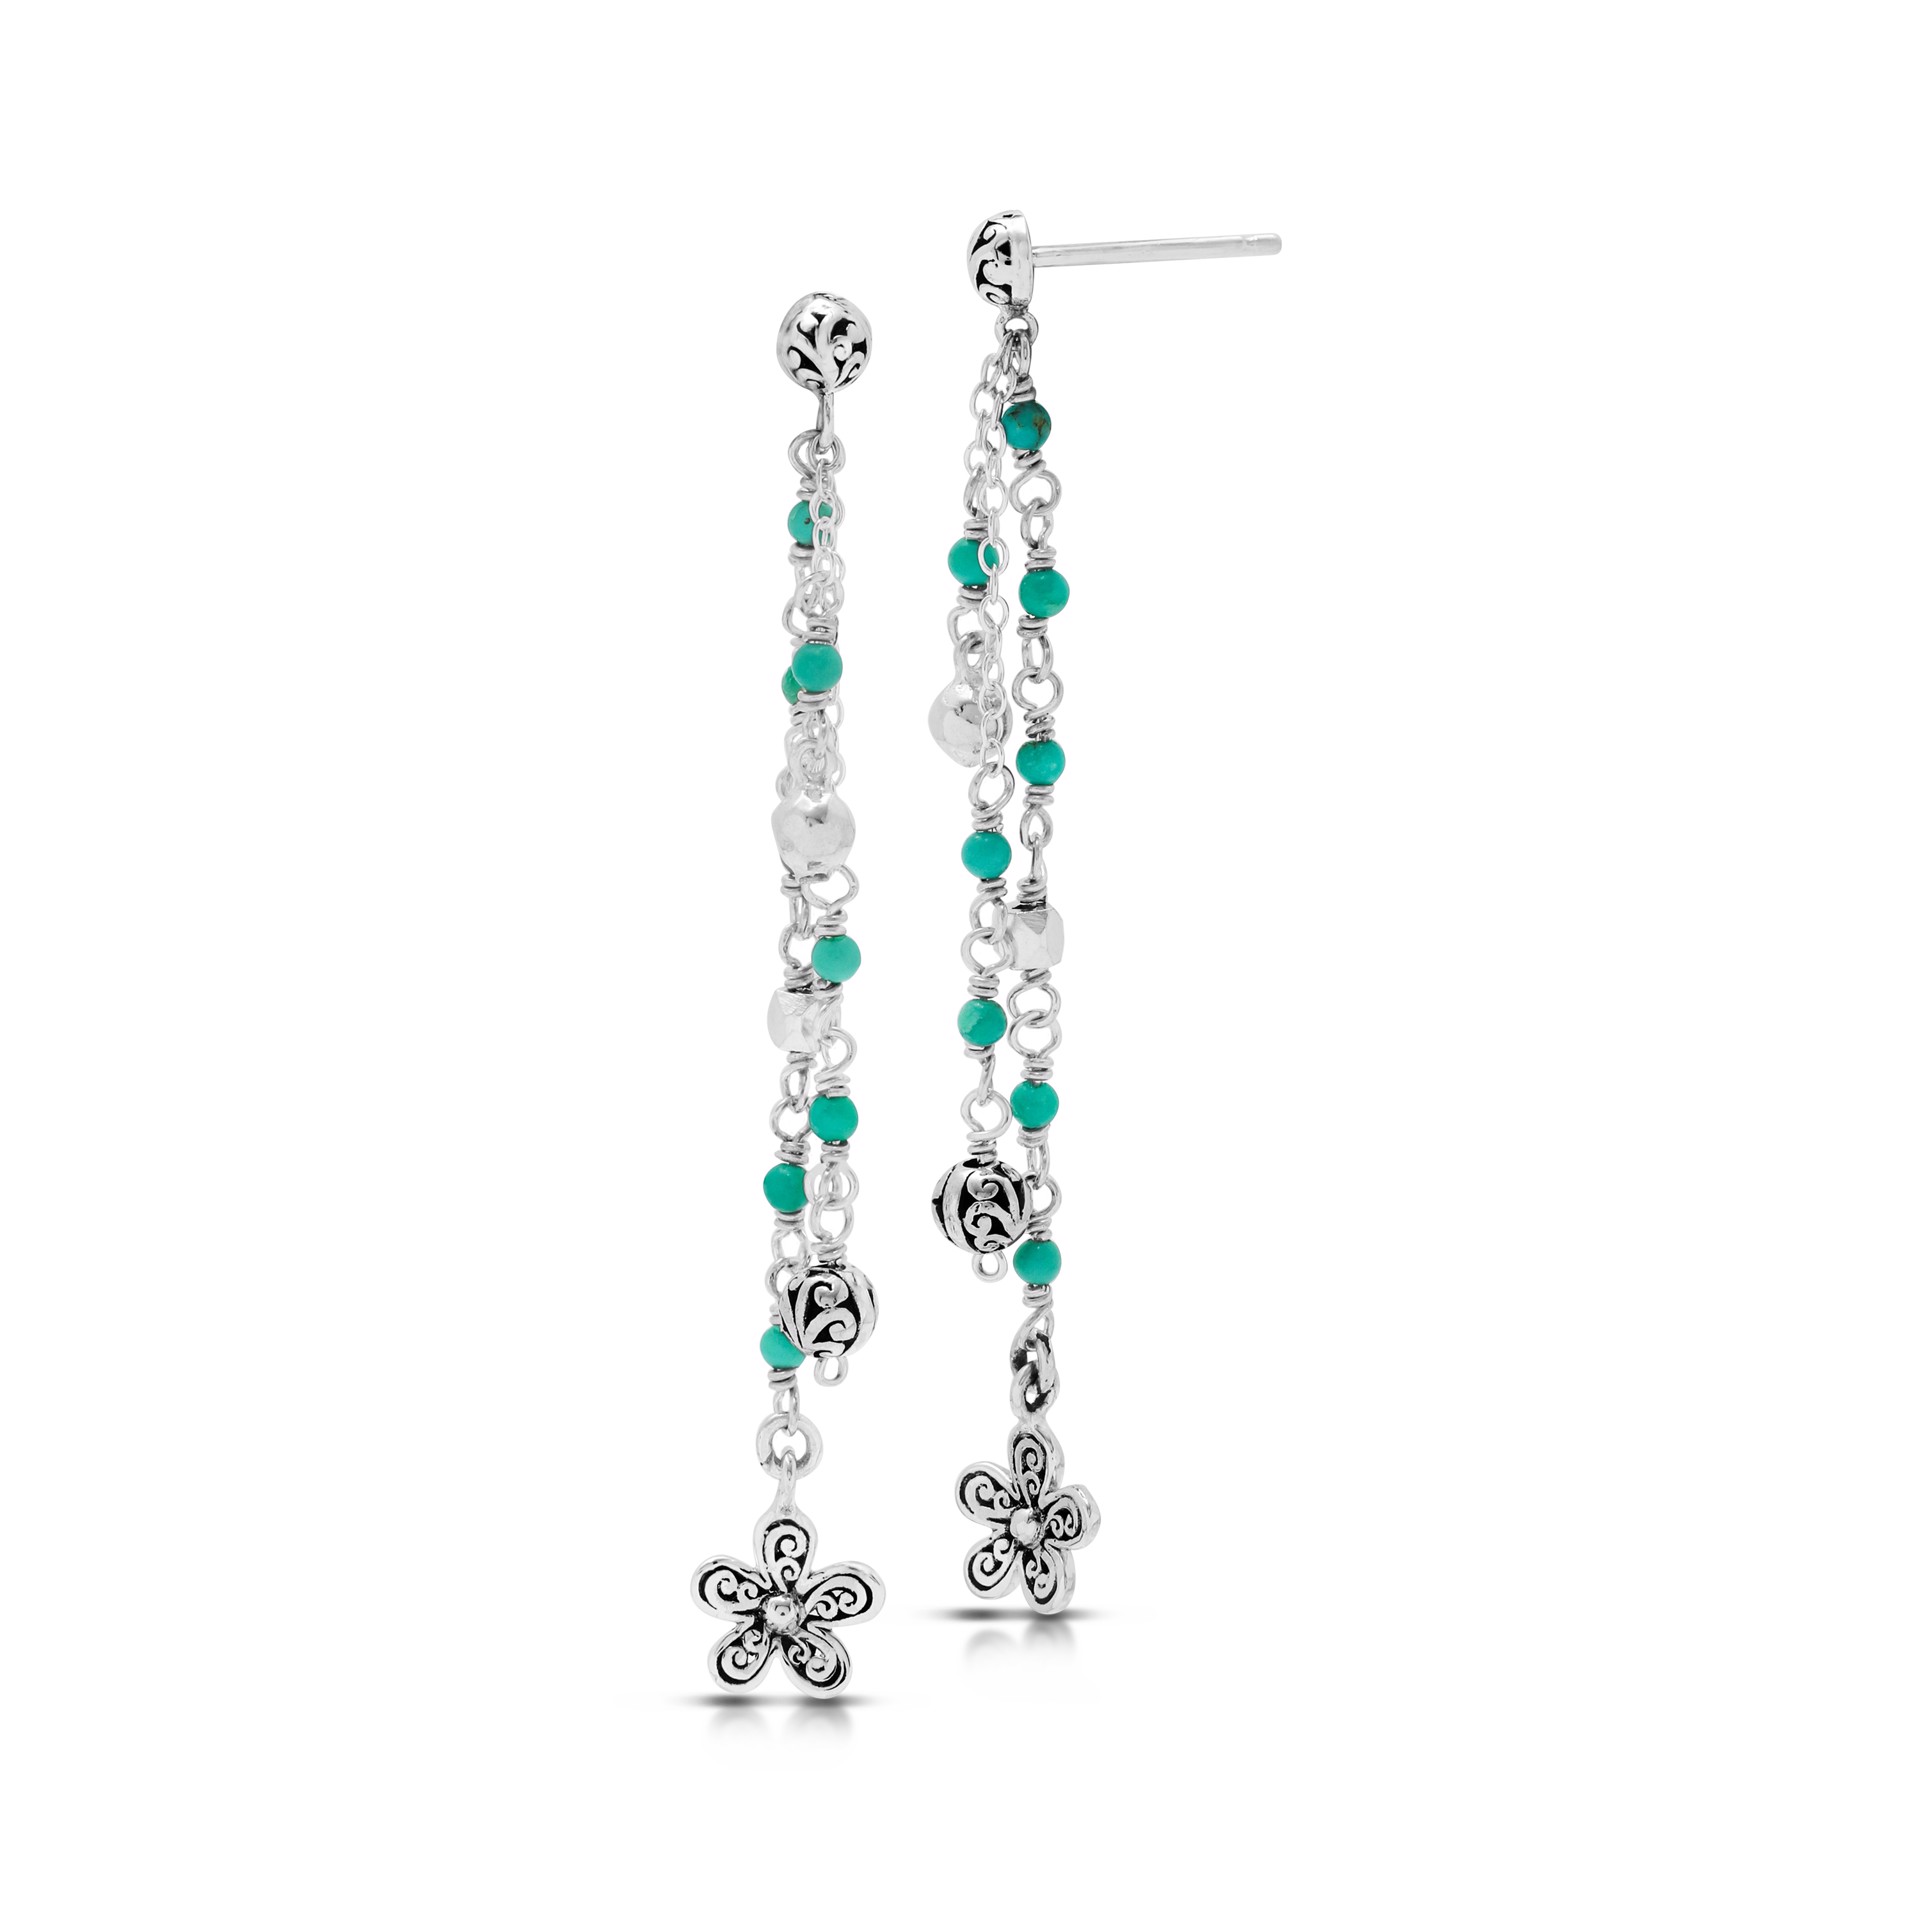 9689 Blue Turquoise Bead with Sterling Silver Scroll Bead and Flower Scroll Drop Fishhook Earrings by Lois Hill